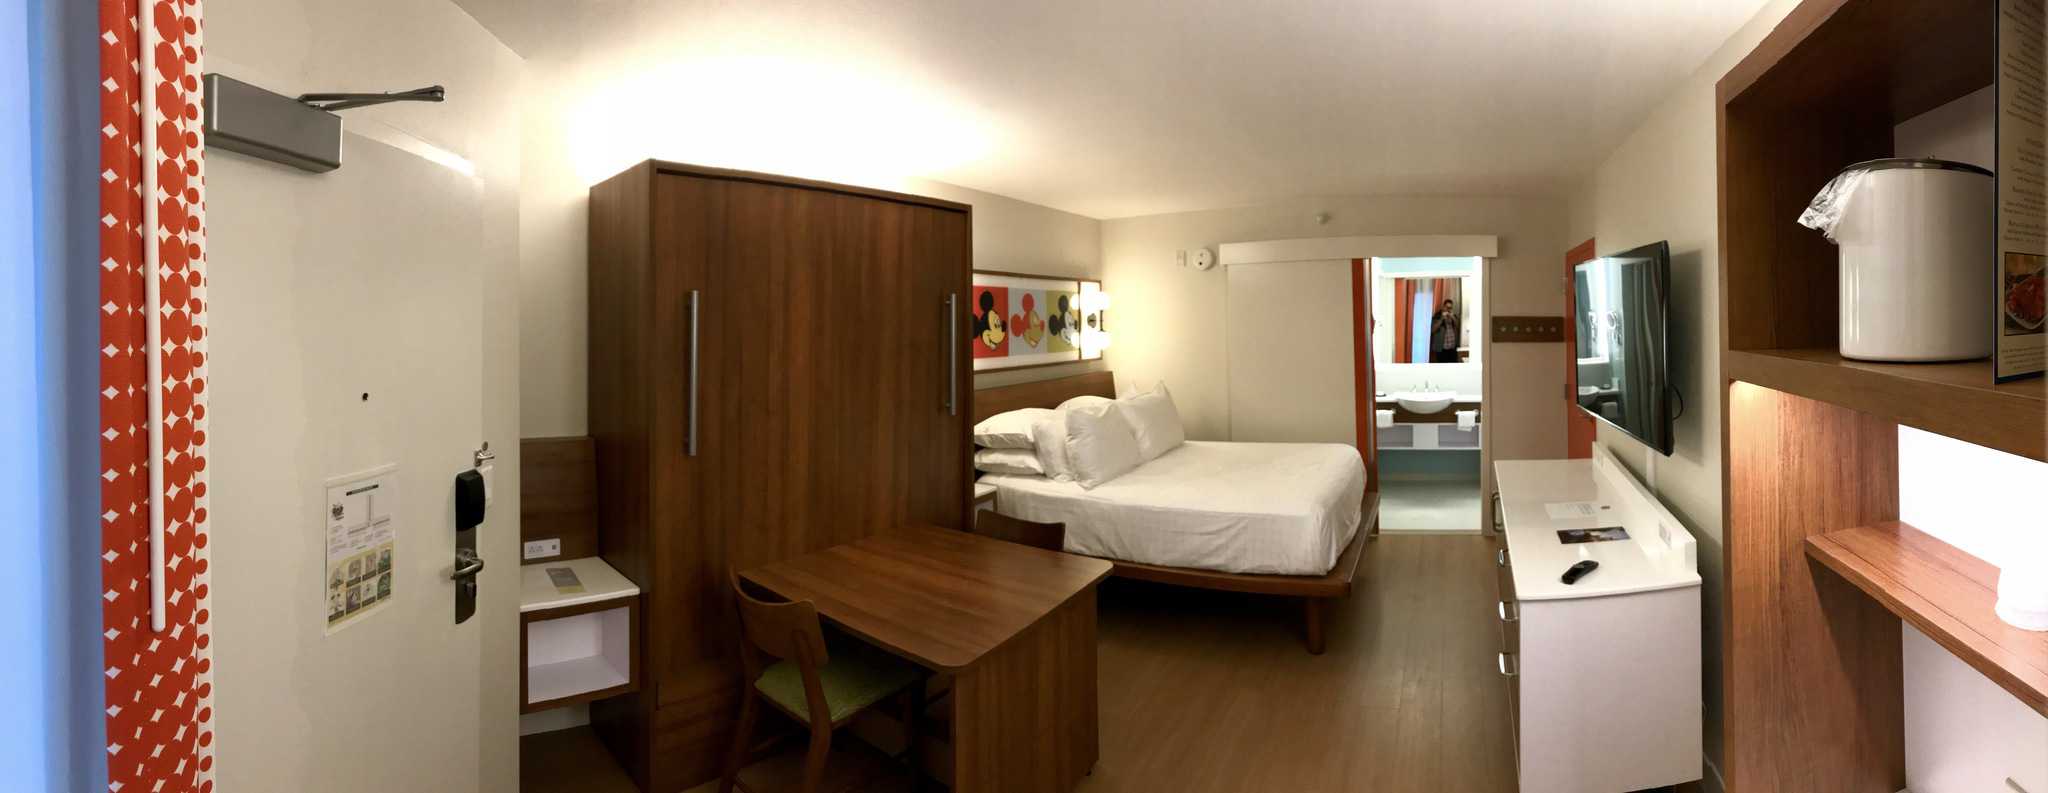 Photos New Modern Style Value Resort Rooms Debut At